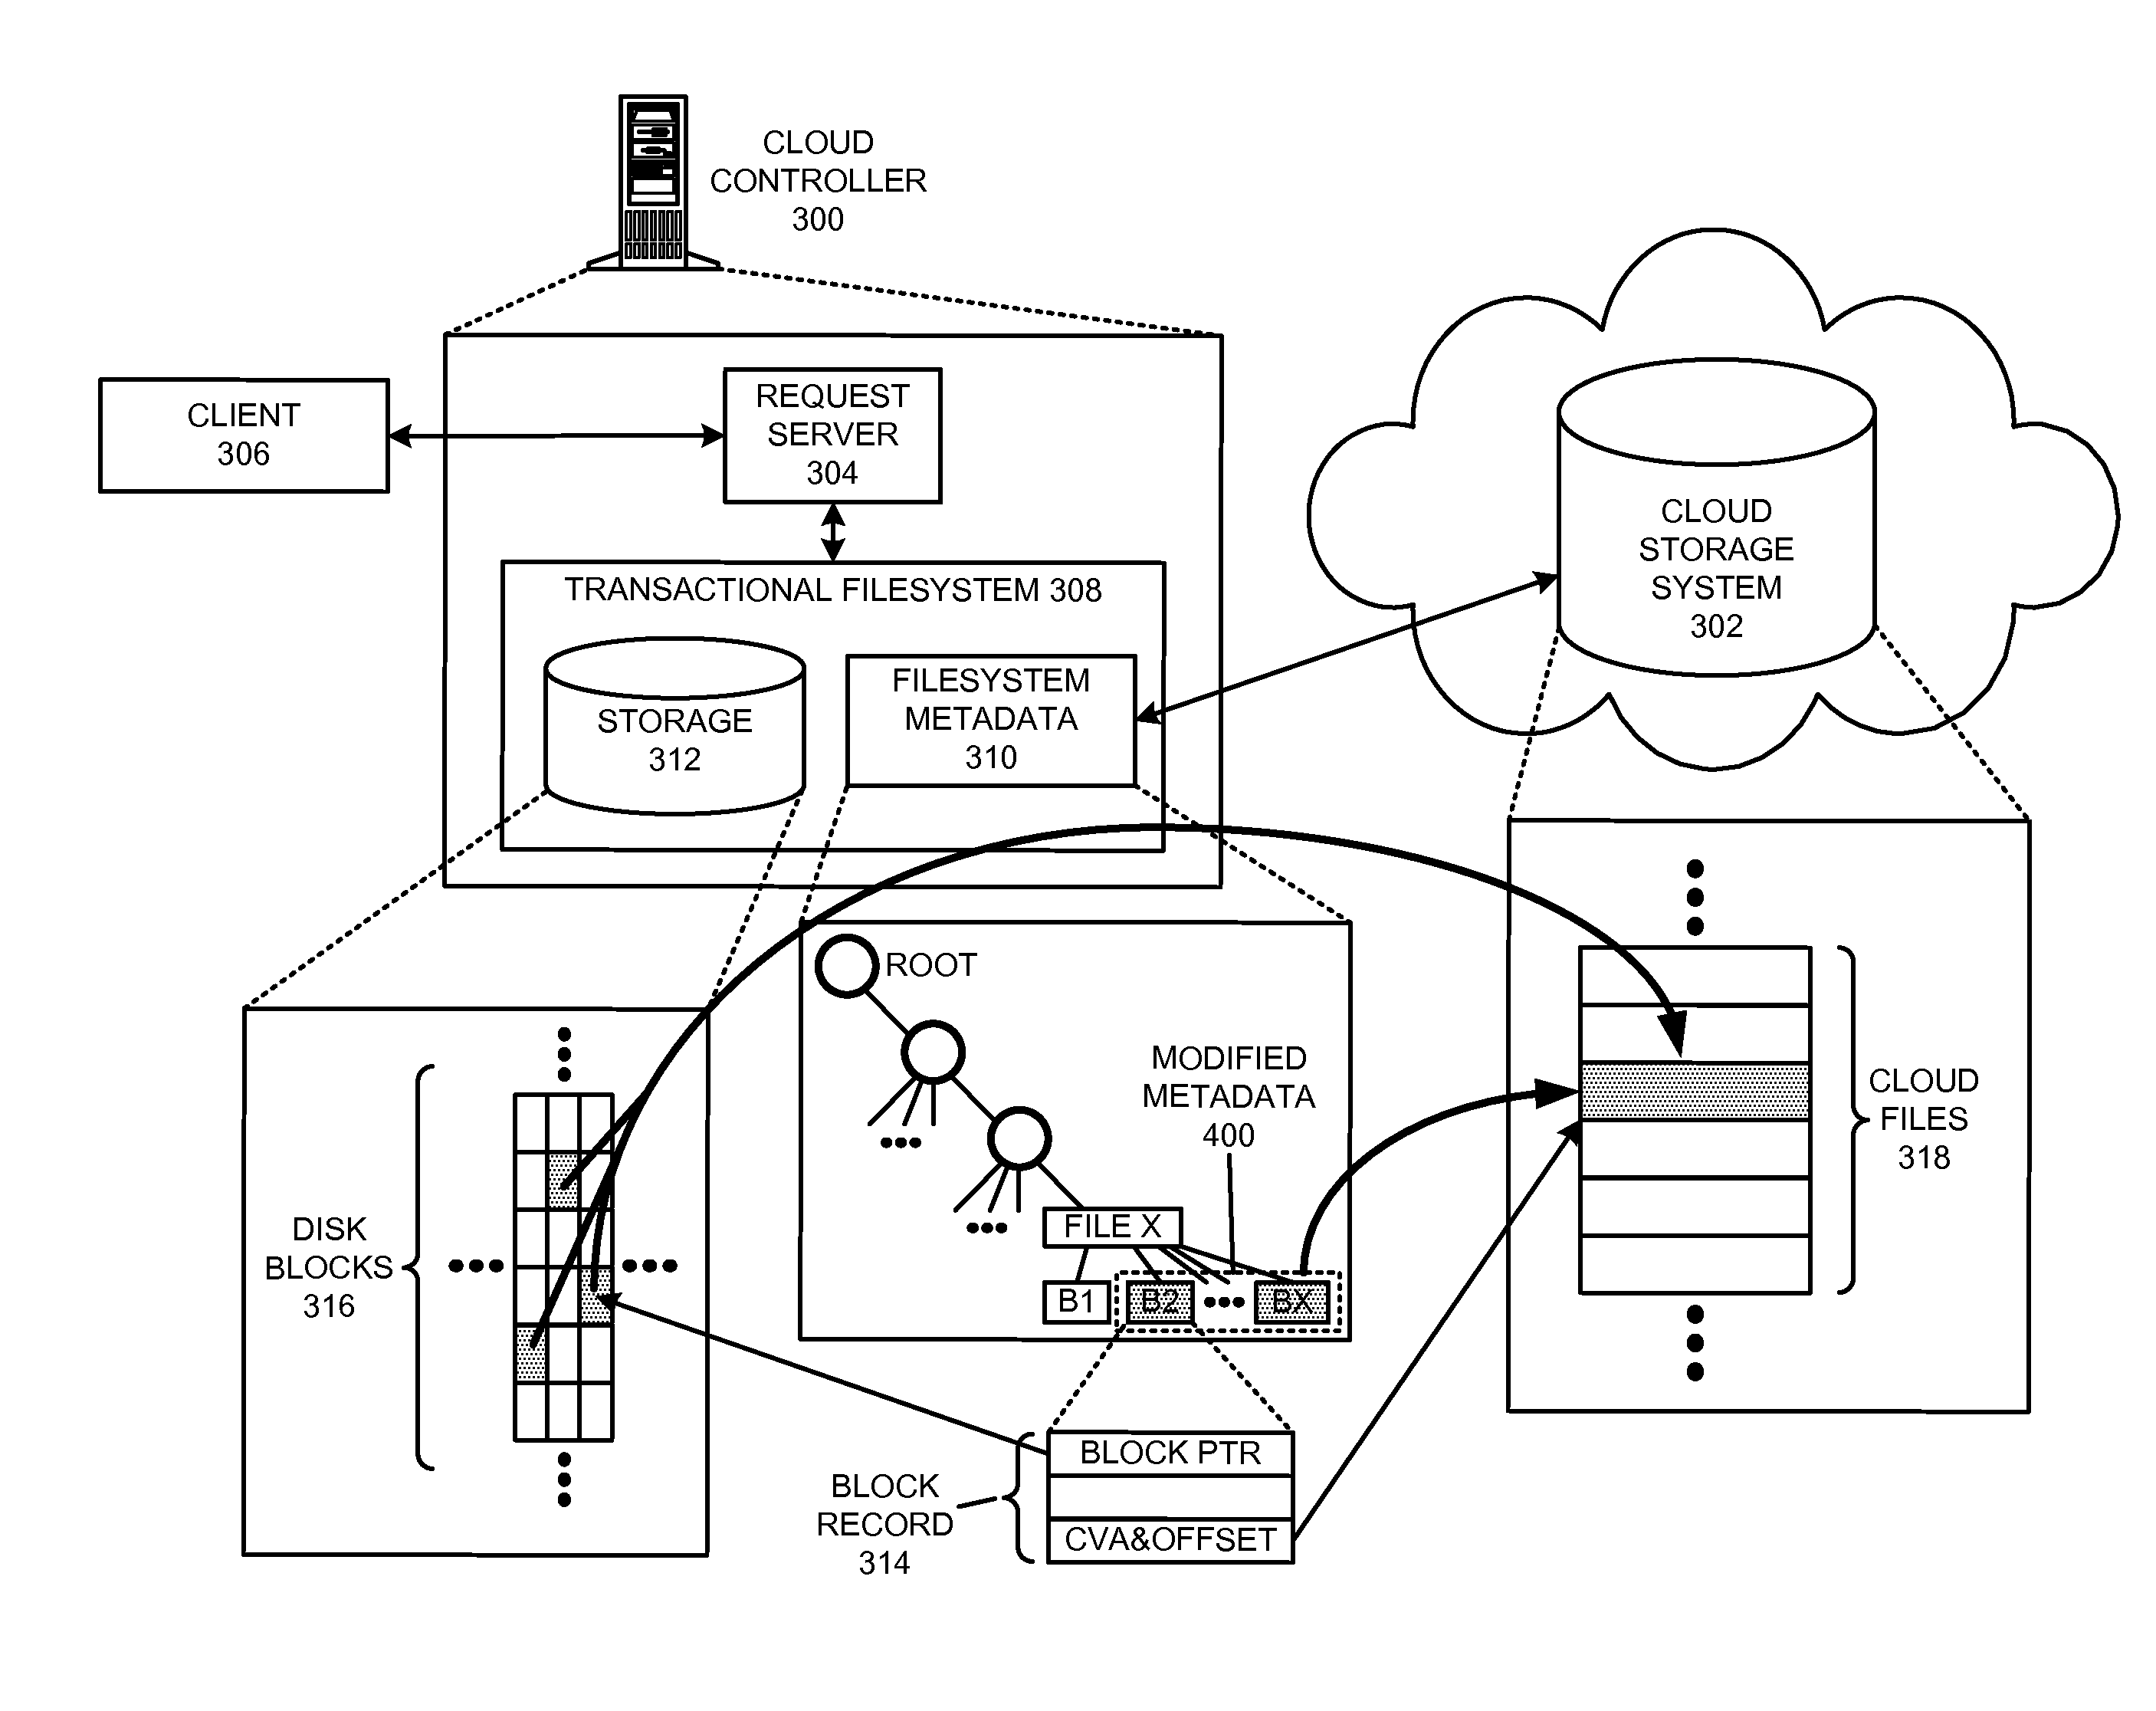 Distributing data for a distributed filesystem across multiple cloud storage systems